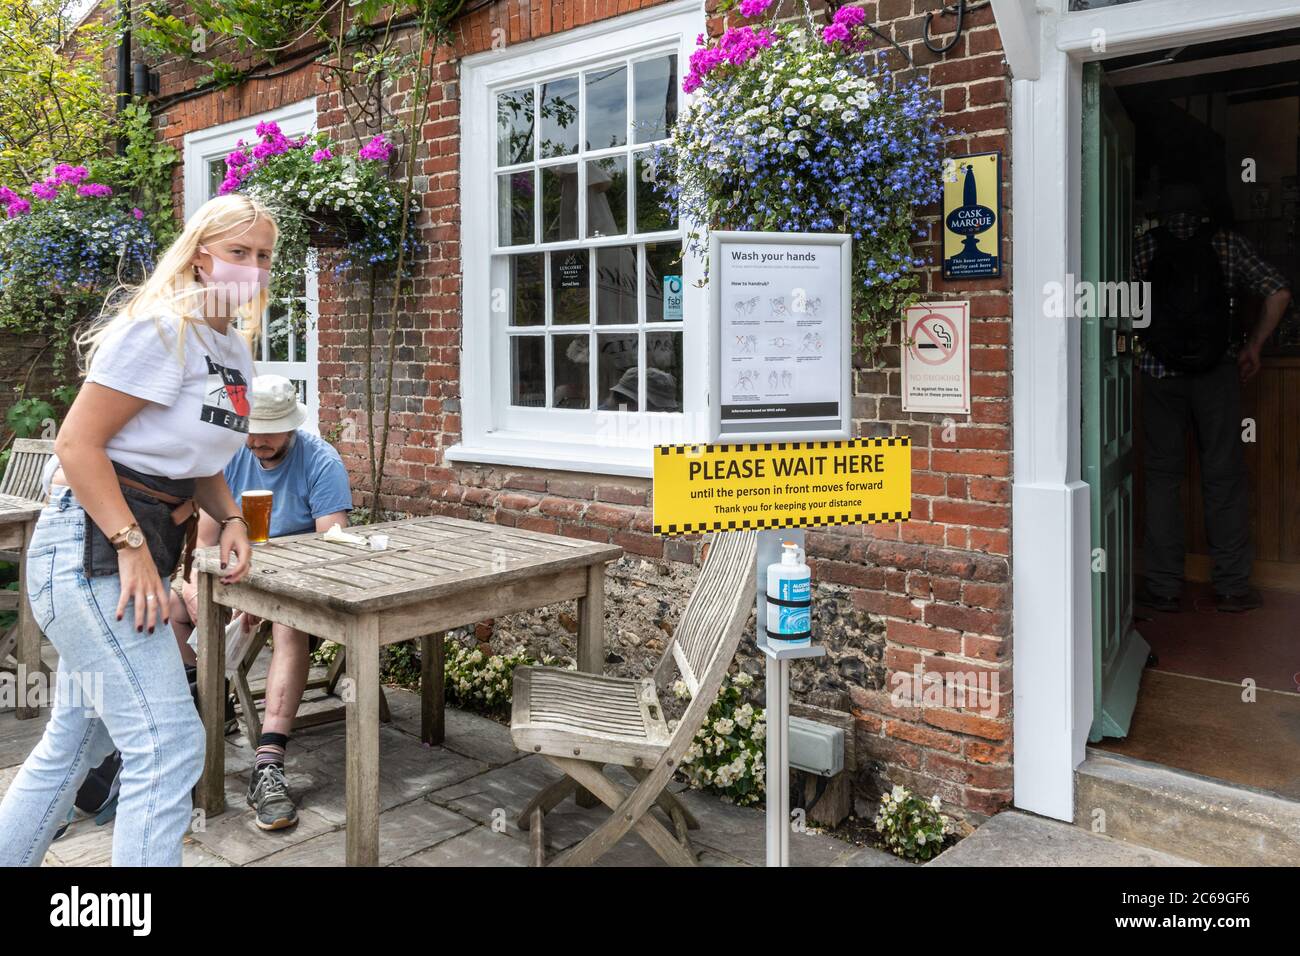 Pubs have reopened in England after coronavirus covid-19 restrictions have eased, 7 July 2020, UK. Pub with hand wash station and safety signs outside Stock Photo